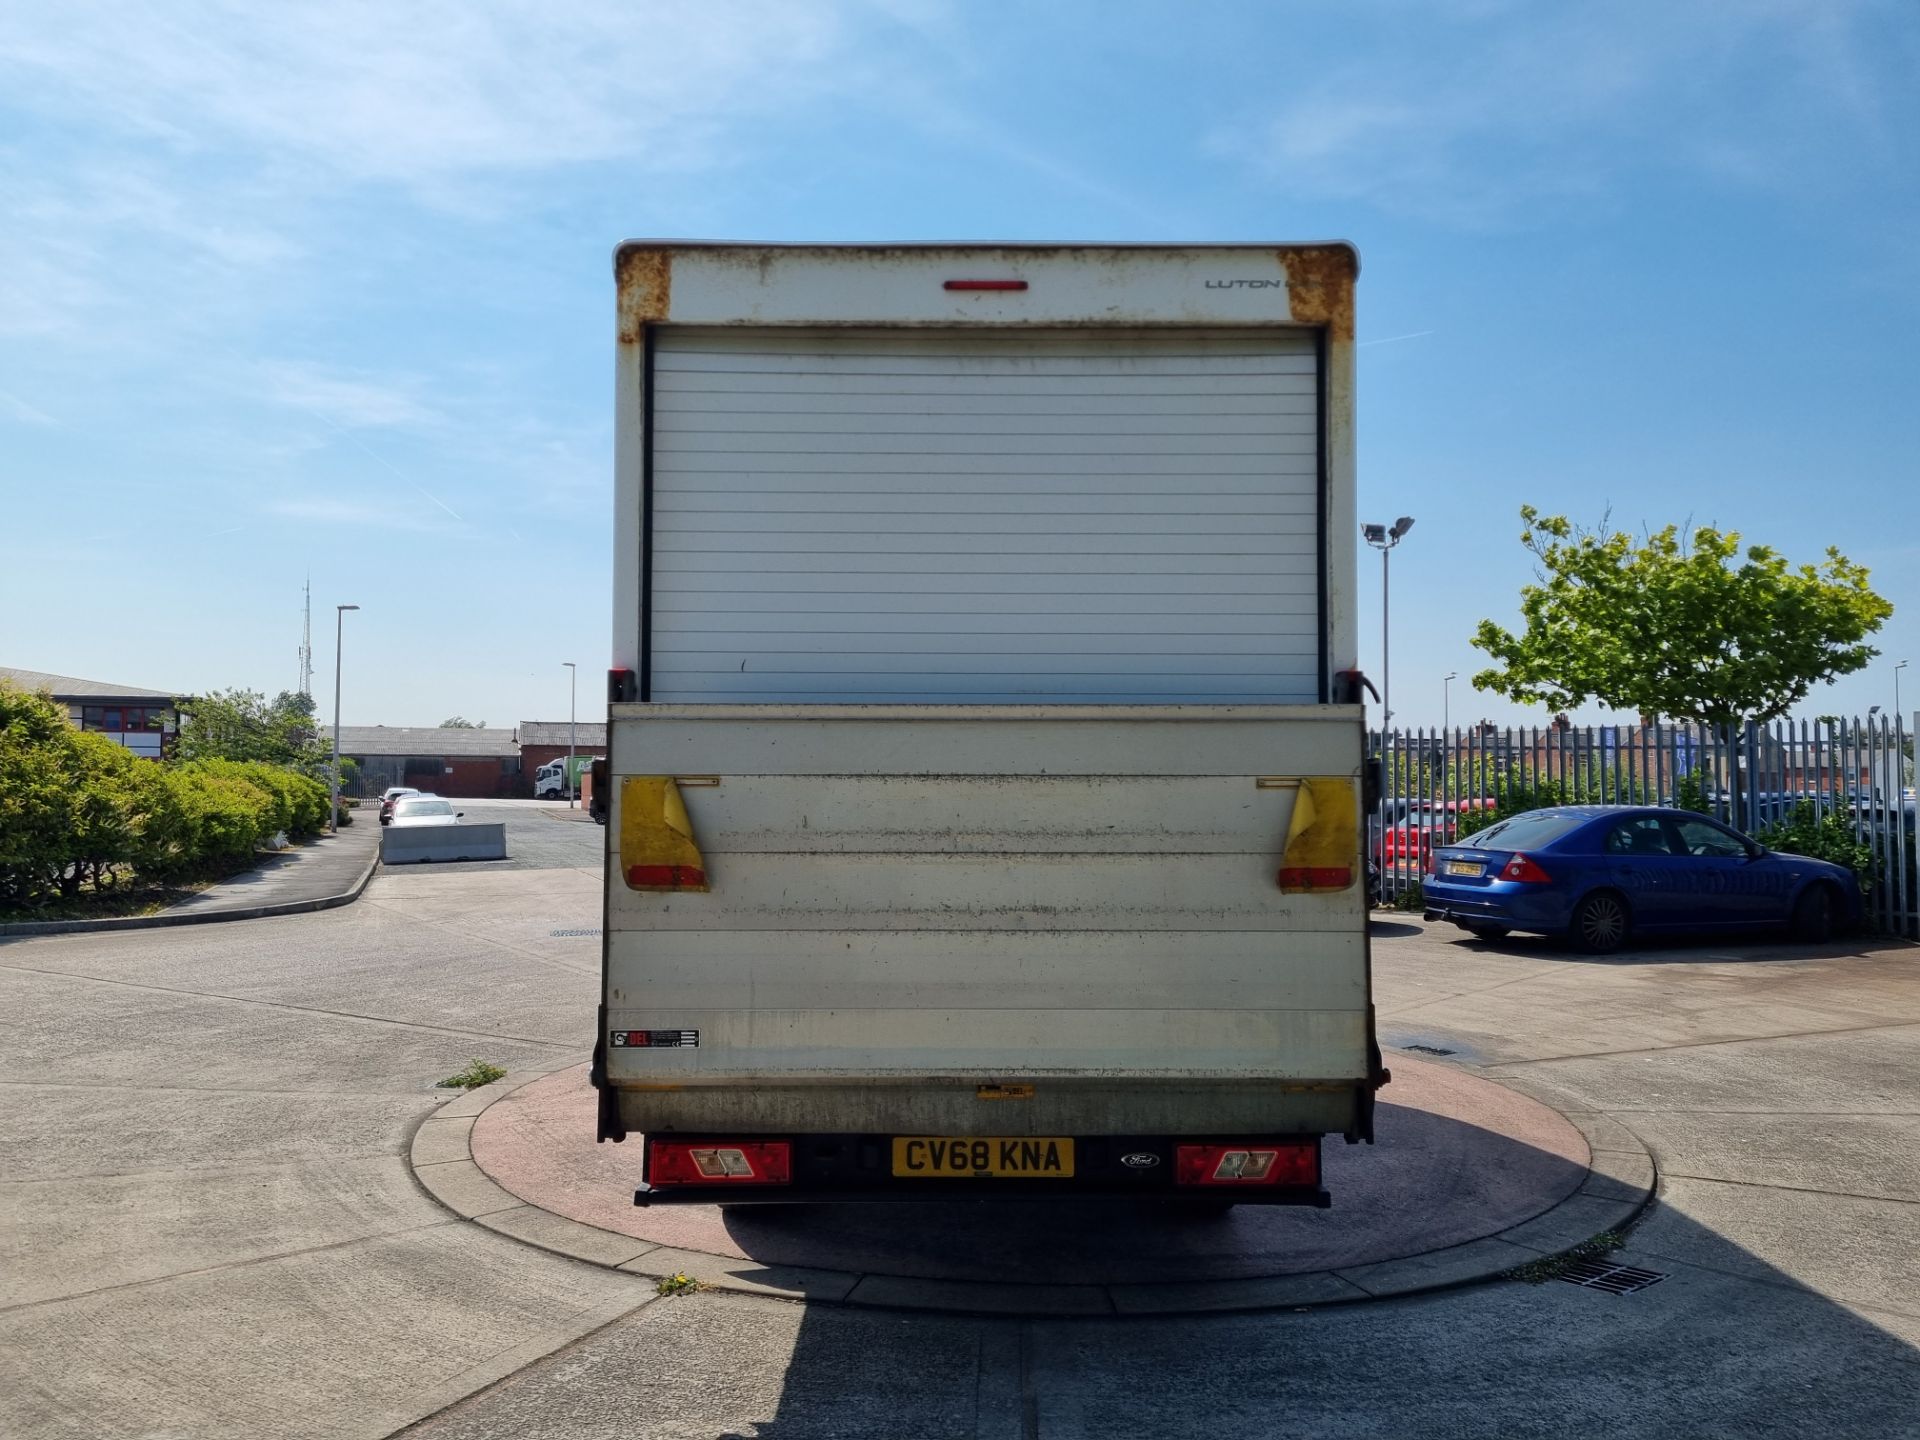 2018 Transit Luton with tail lift - Image 4 of 14